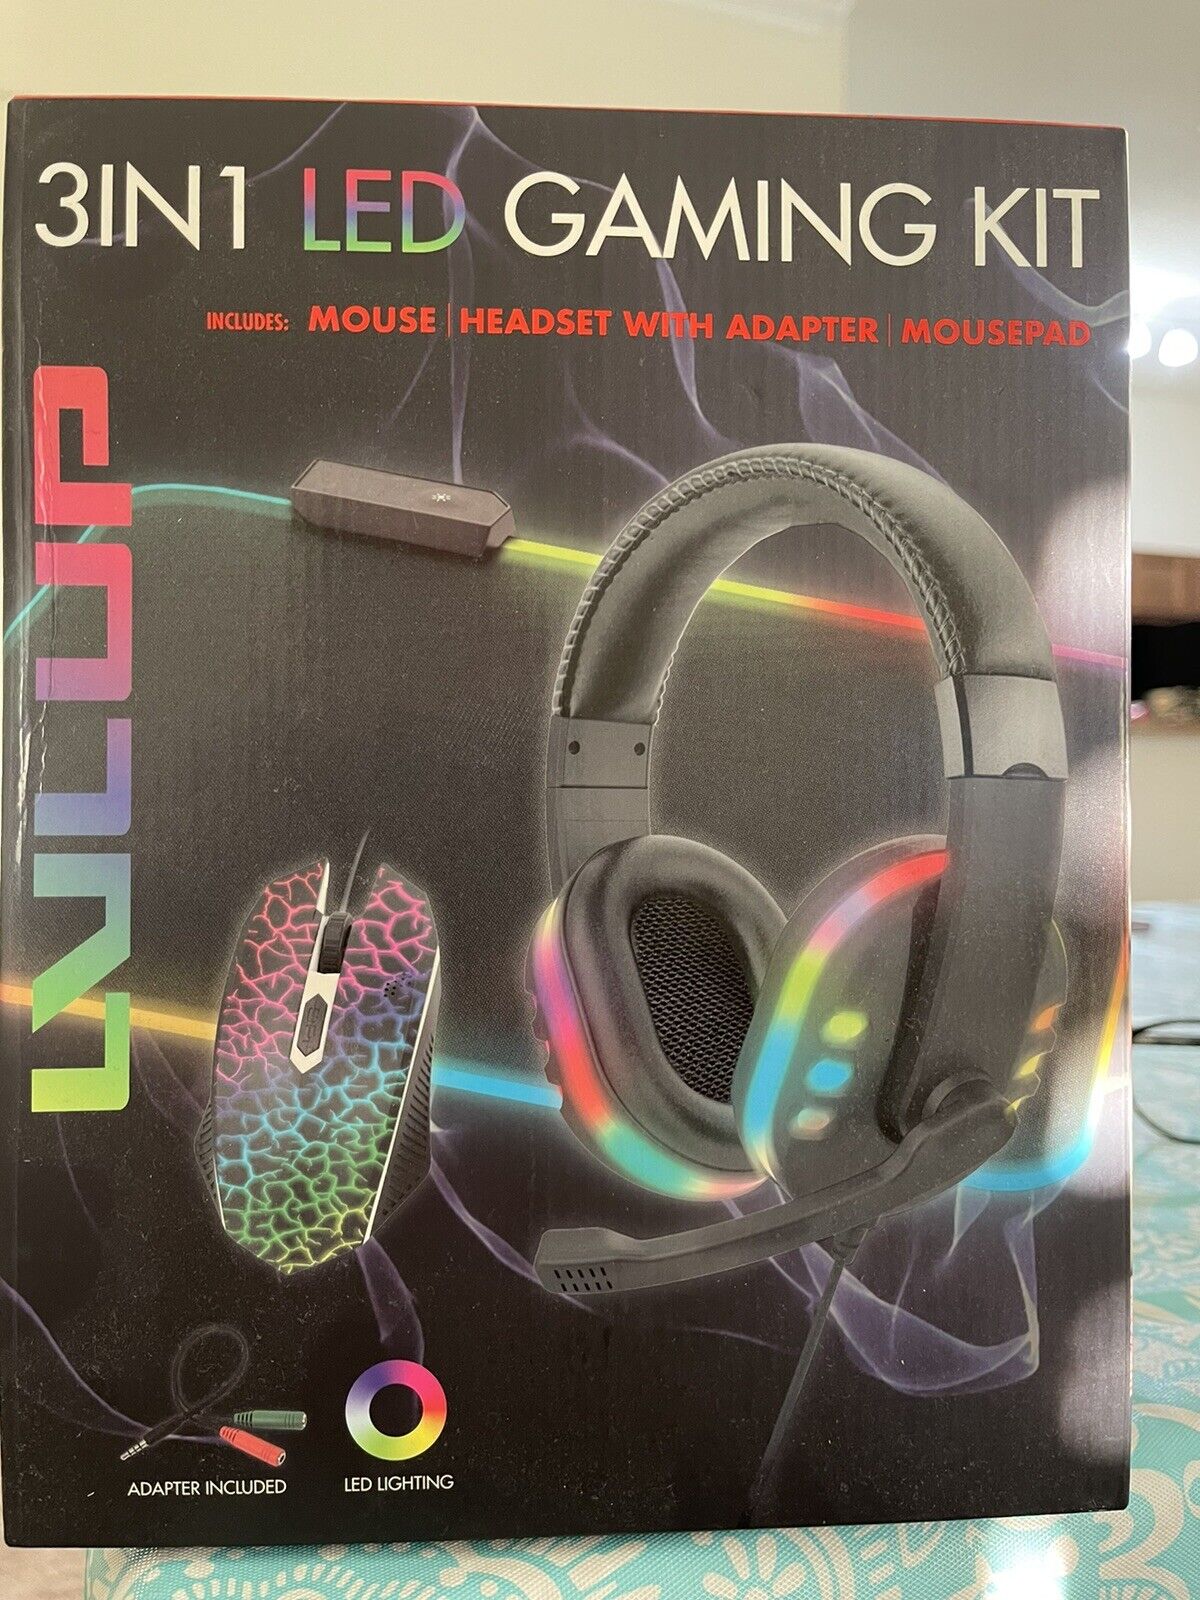 LVLUP  3 in 1 LED Gaming Kit Includes Mouse, Headset w/Adapter, Mousepad